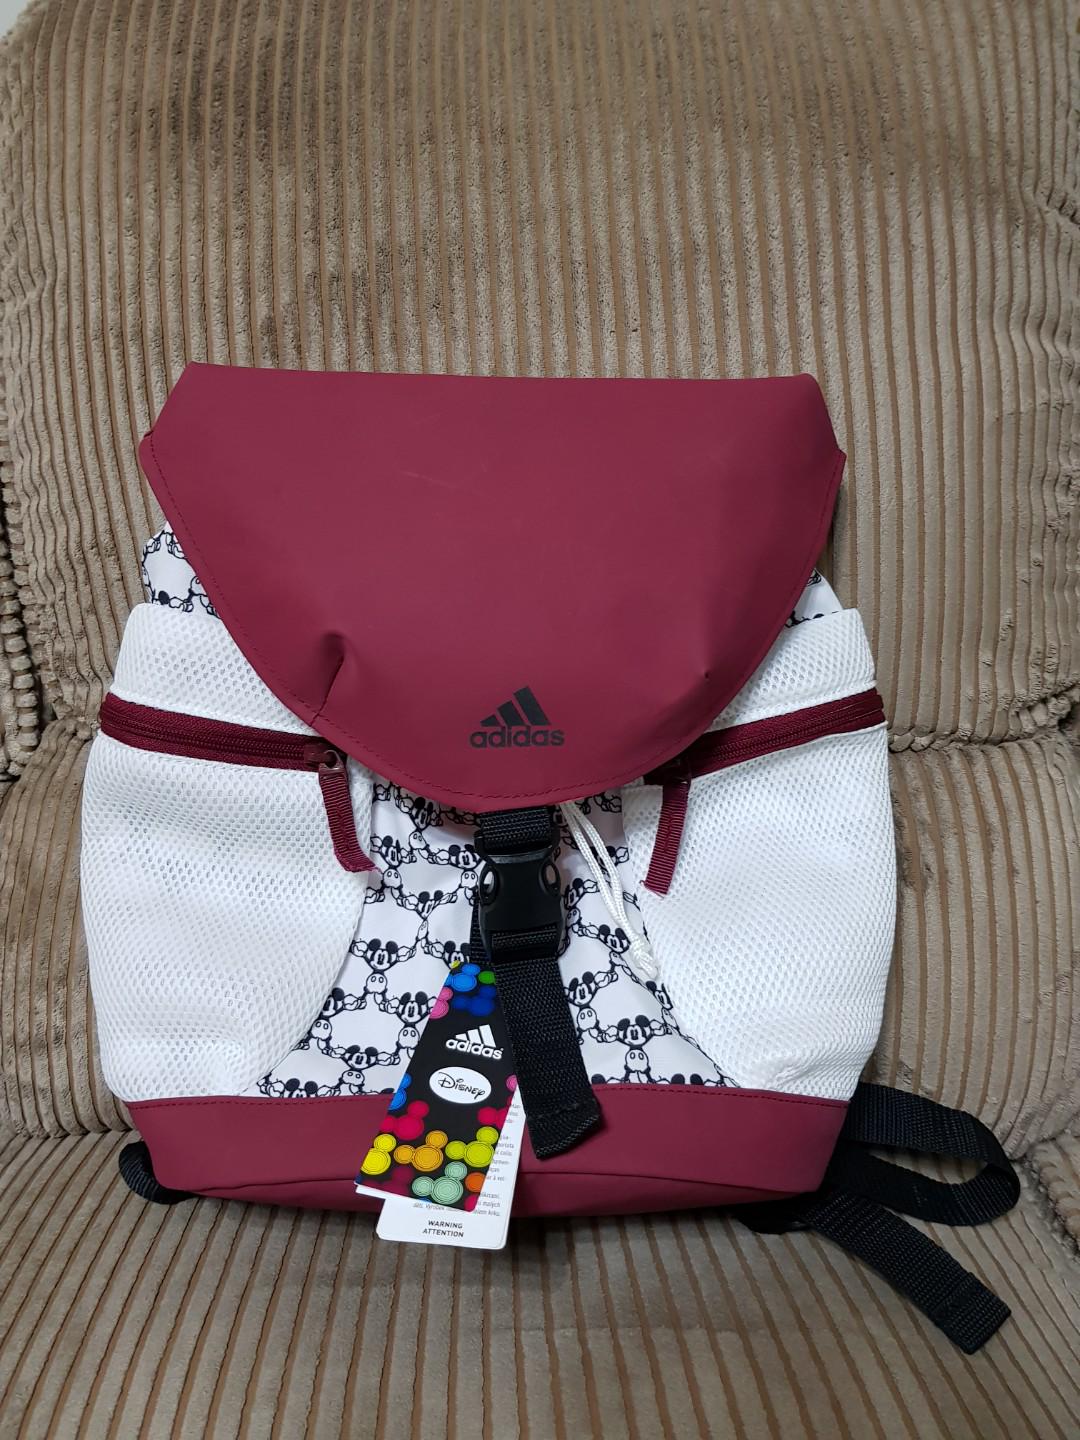 adidas mickey mouse backpack